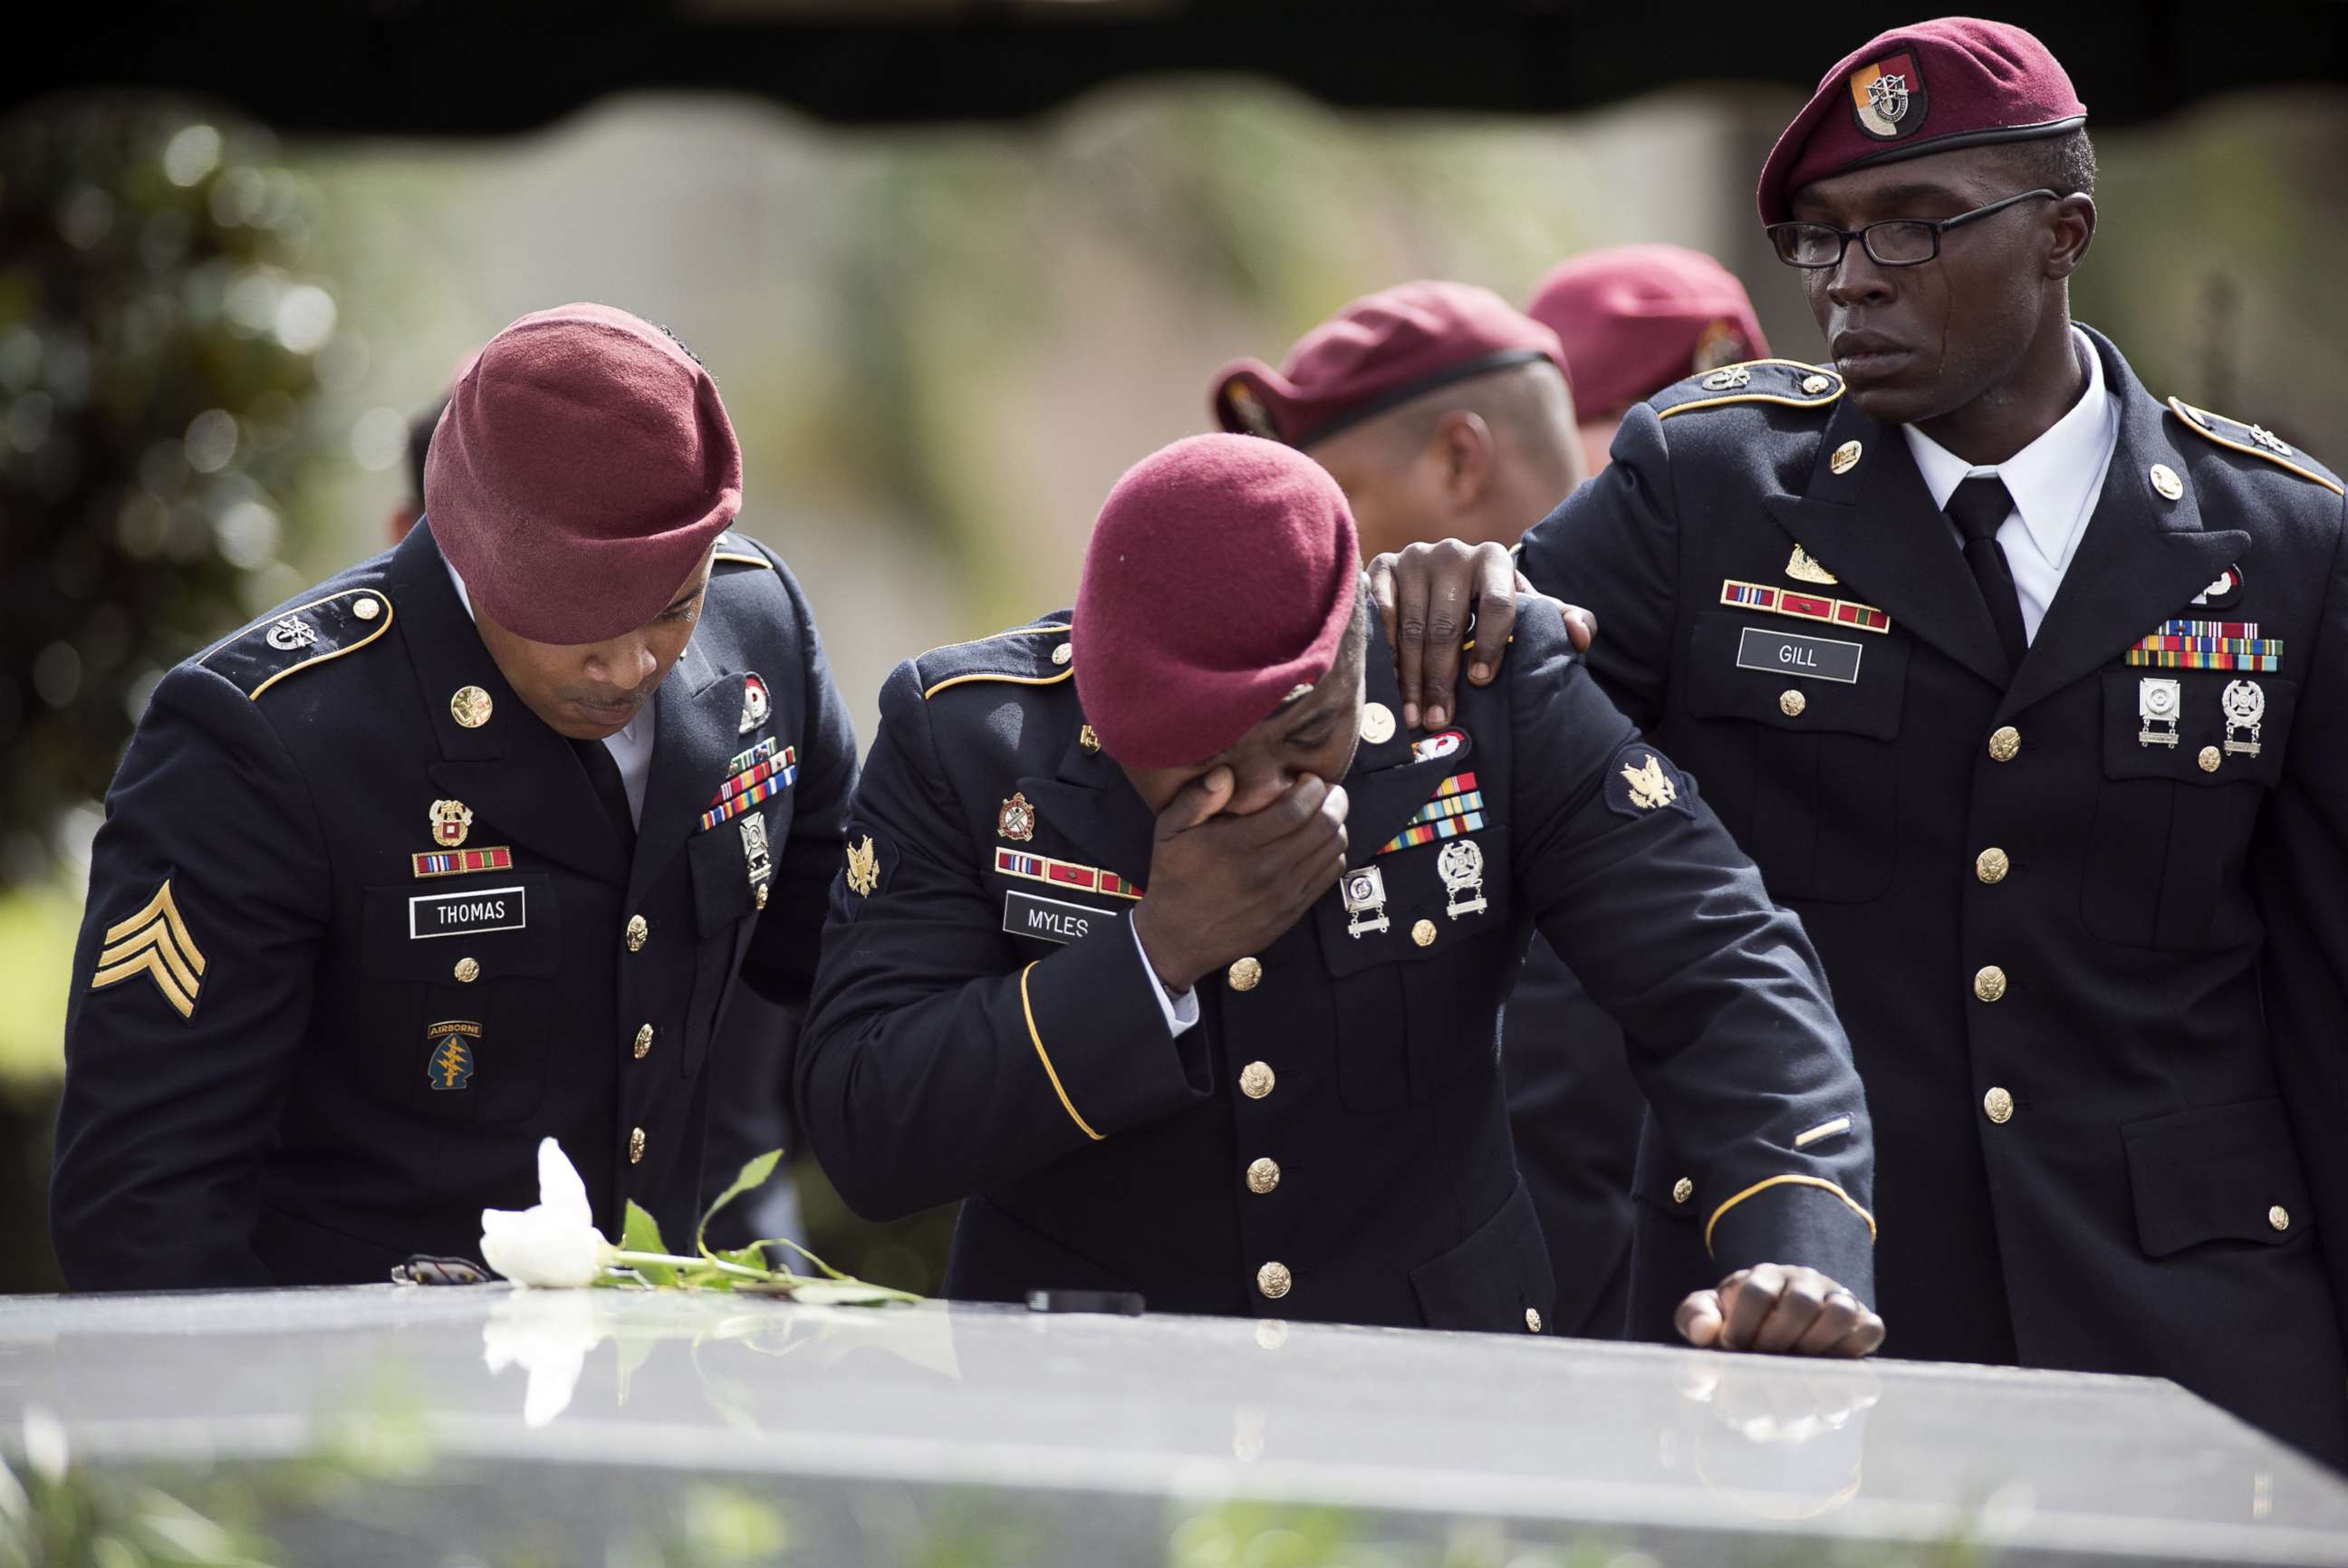 PHOTO: Members of the Special Forces cry at the tomb of Army Sgt. La David Johnson at his burial service in the Memorial Gardens East cemetery, Oct. 21, 2017 in Hollywood, Fla. Sgt. Johnson and three other U.S. soldiers were killed in an ambush in Niger.